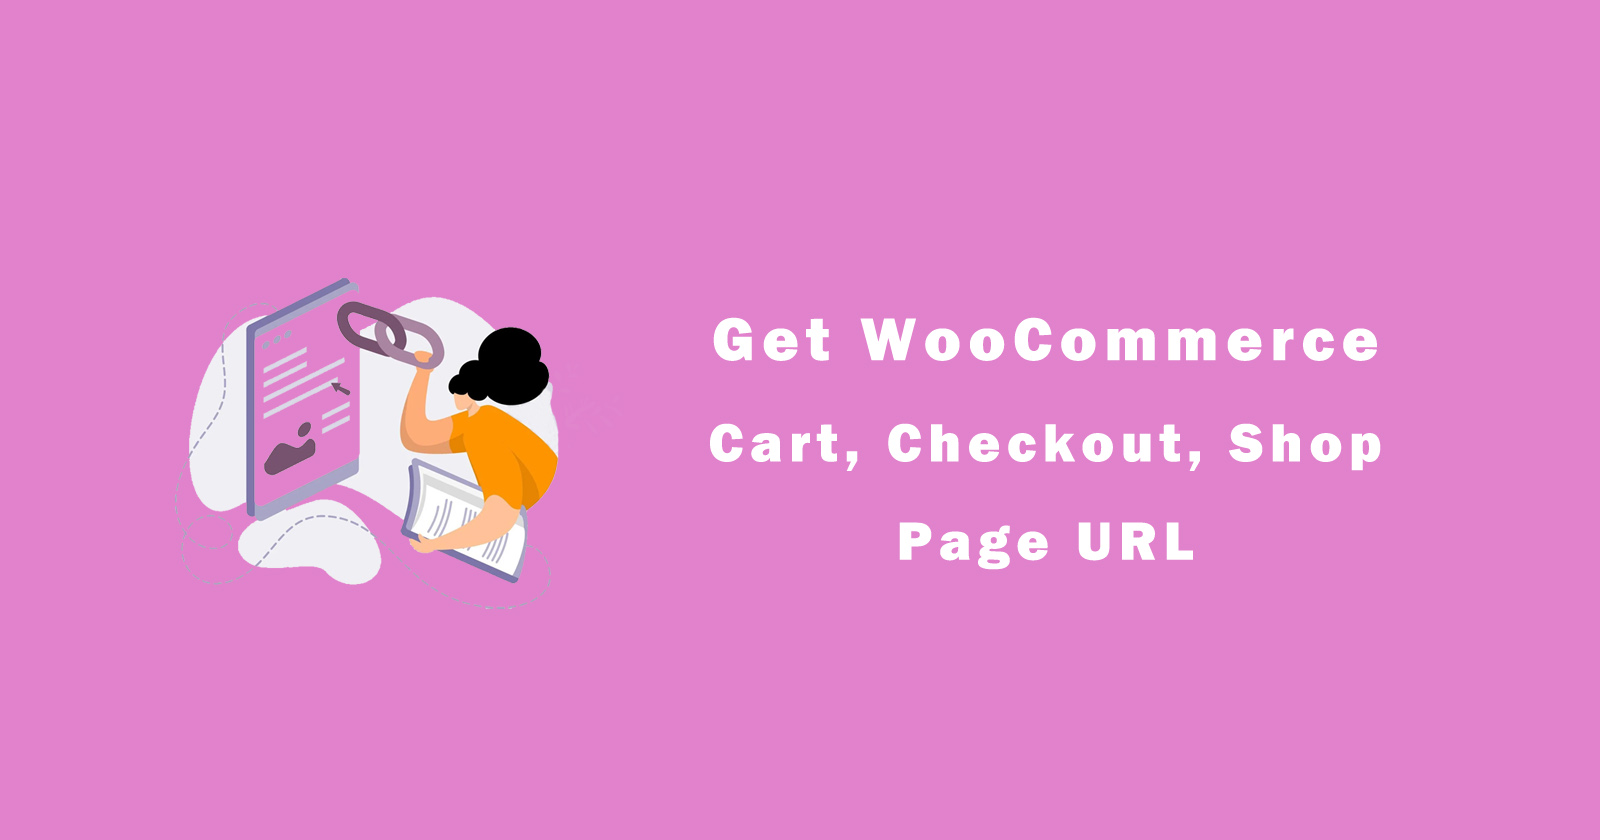 How to Get WooCommerce Cart, Checkout, Shop Page URL Dynamically?